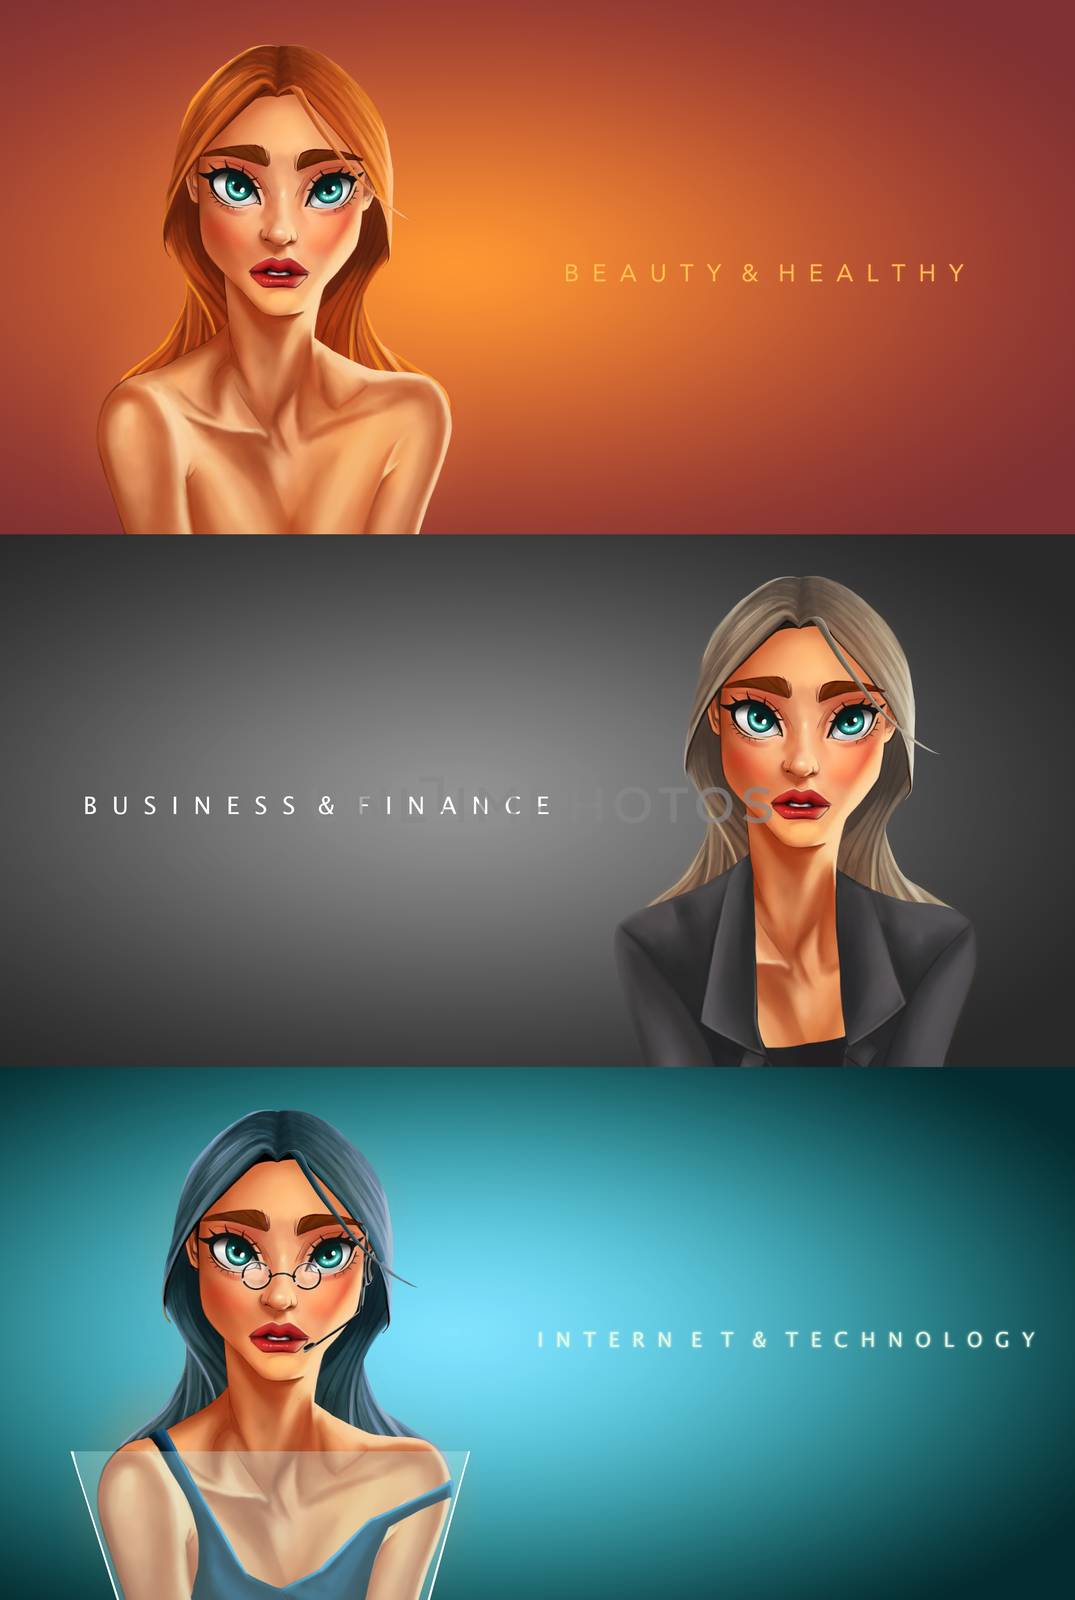 Digital painting woman in defferent styles: business girl, healthy girl, and social girl 